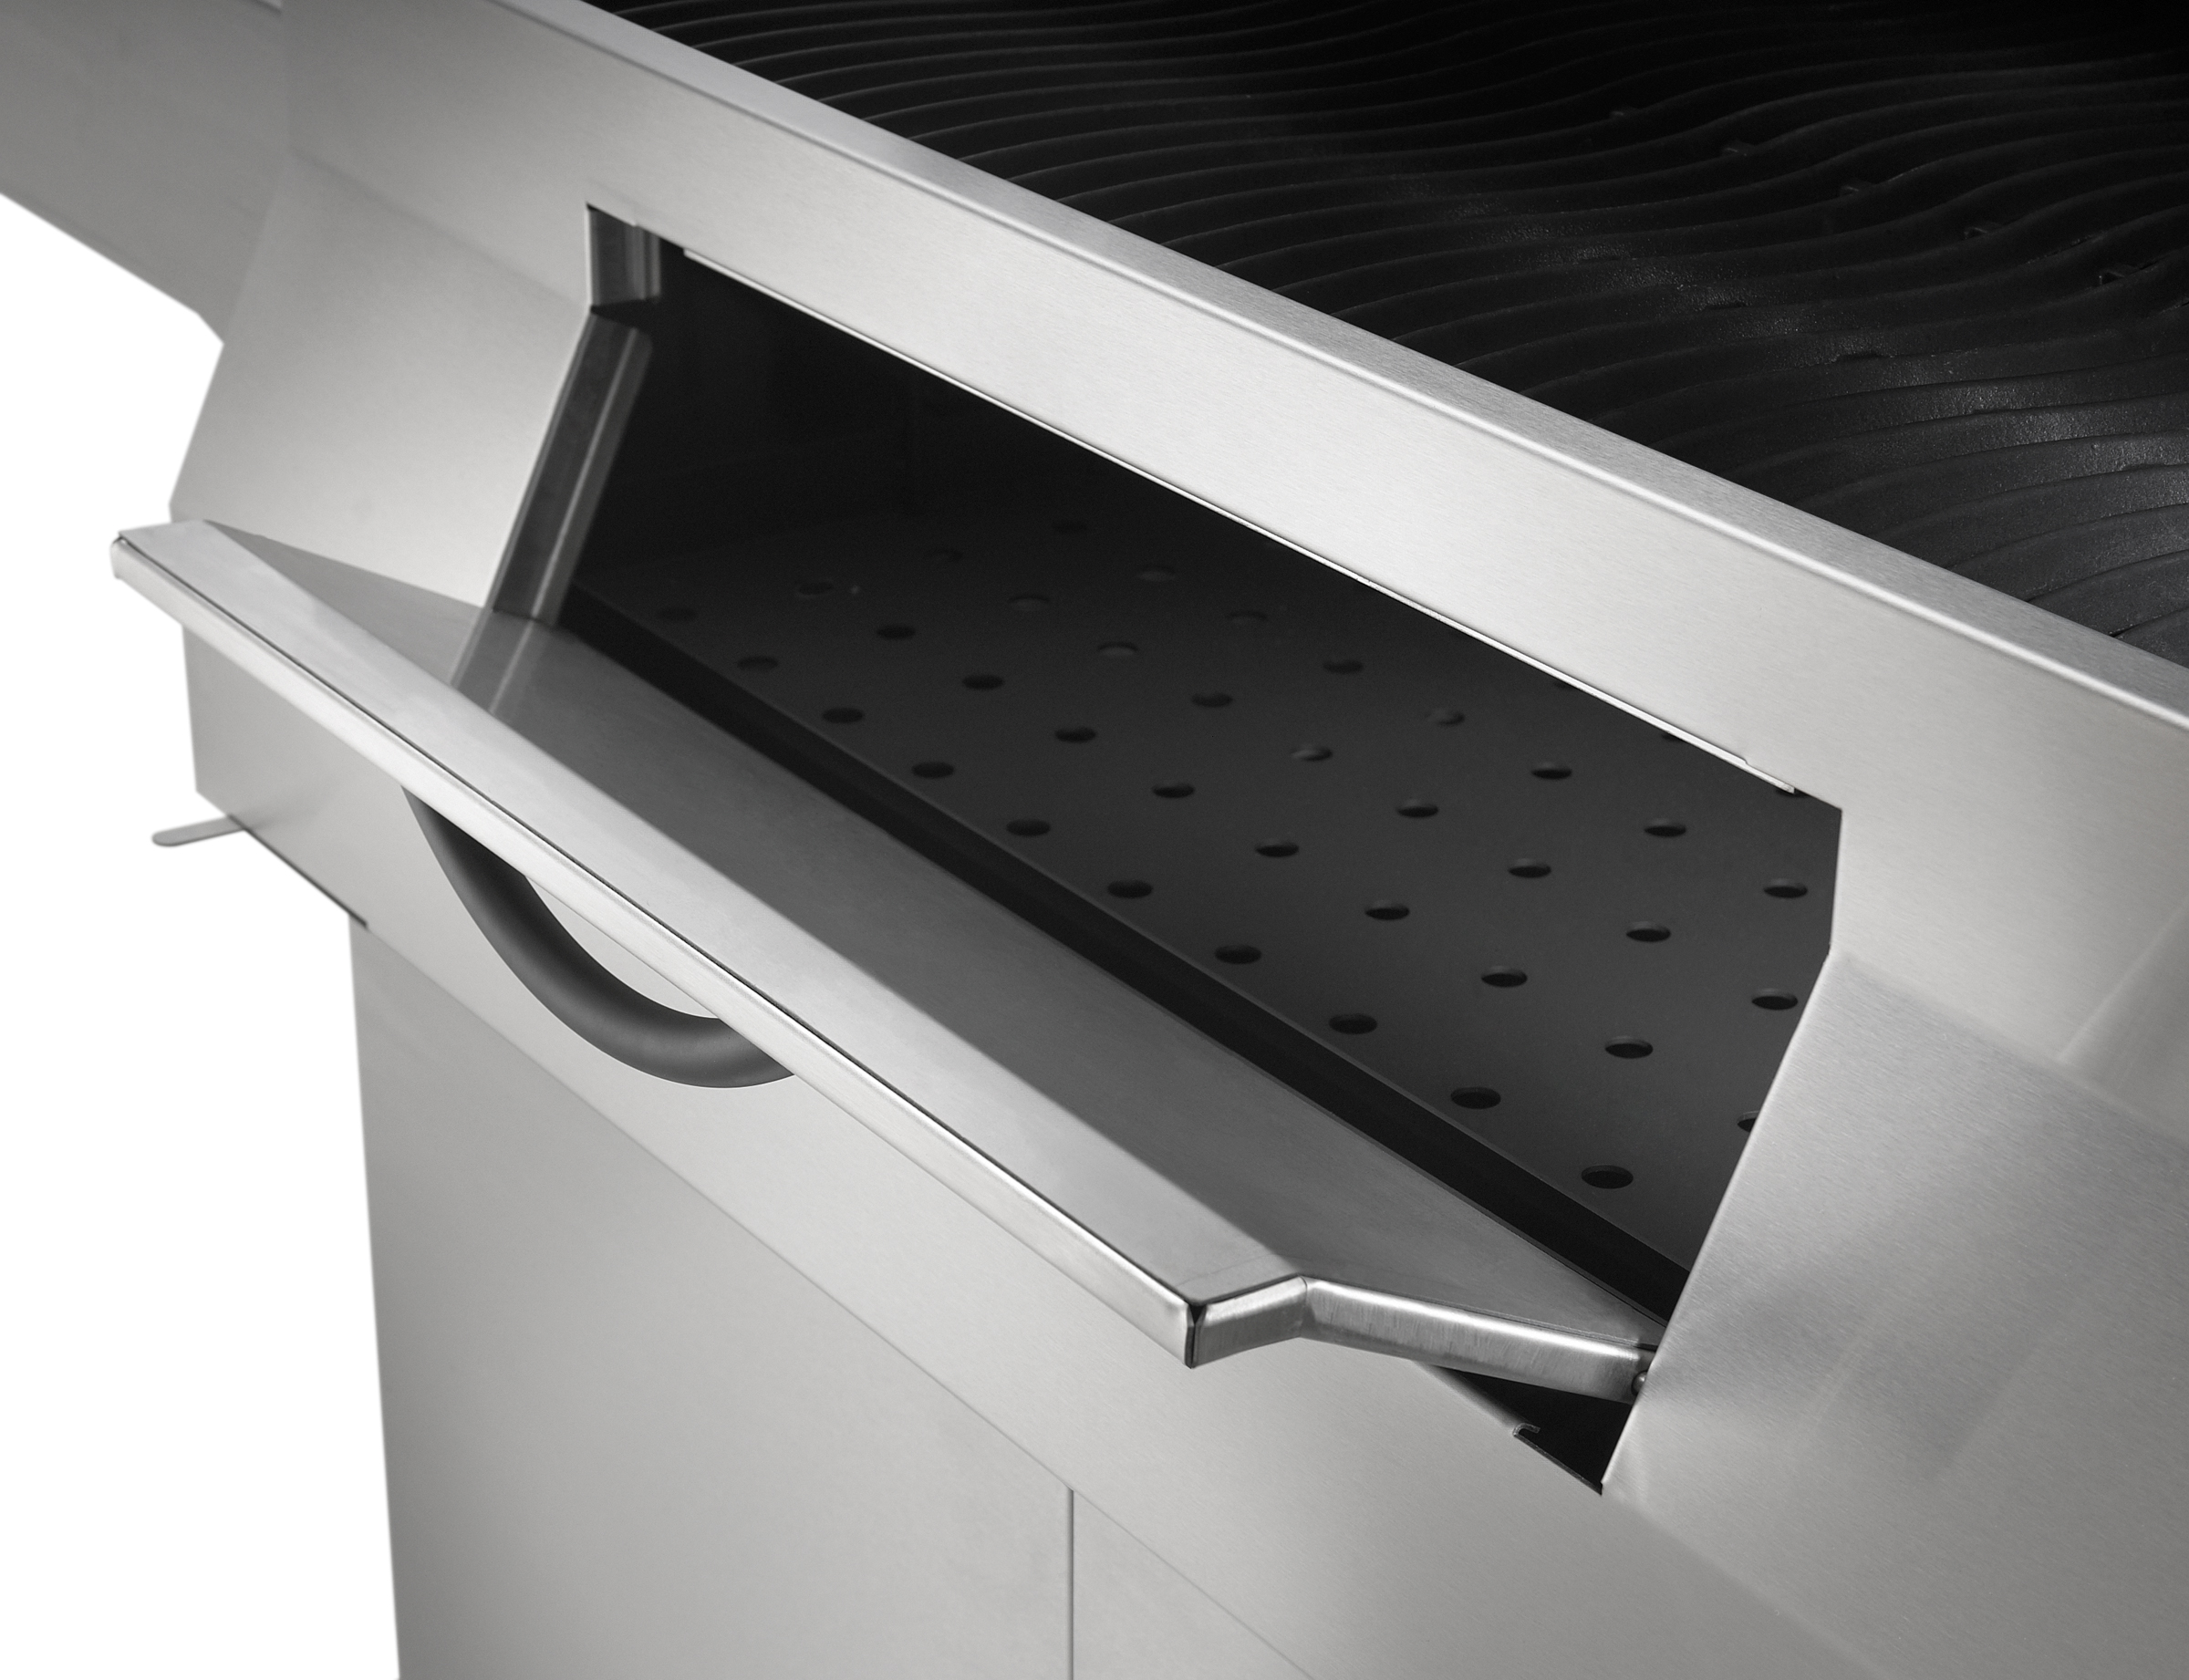 Charcoal Professional Grill, Stainless Steel - PRO605CSS - image 3 of 7